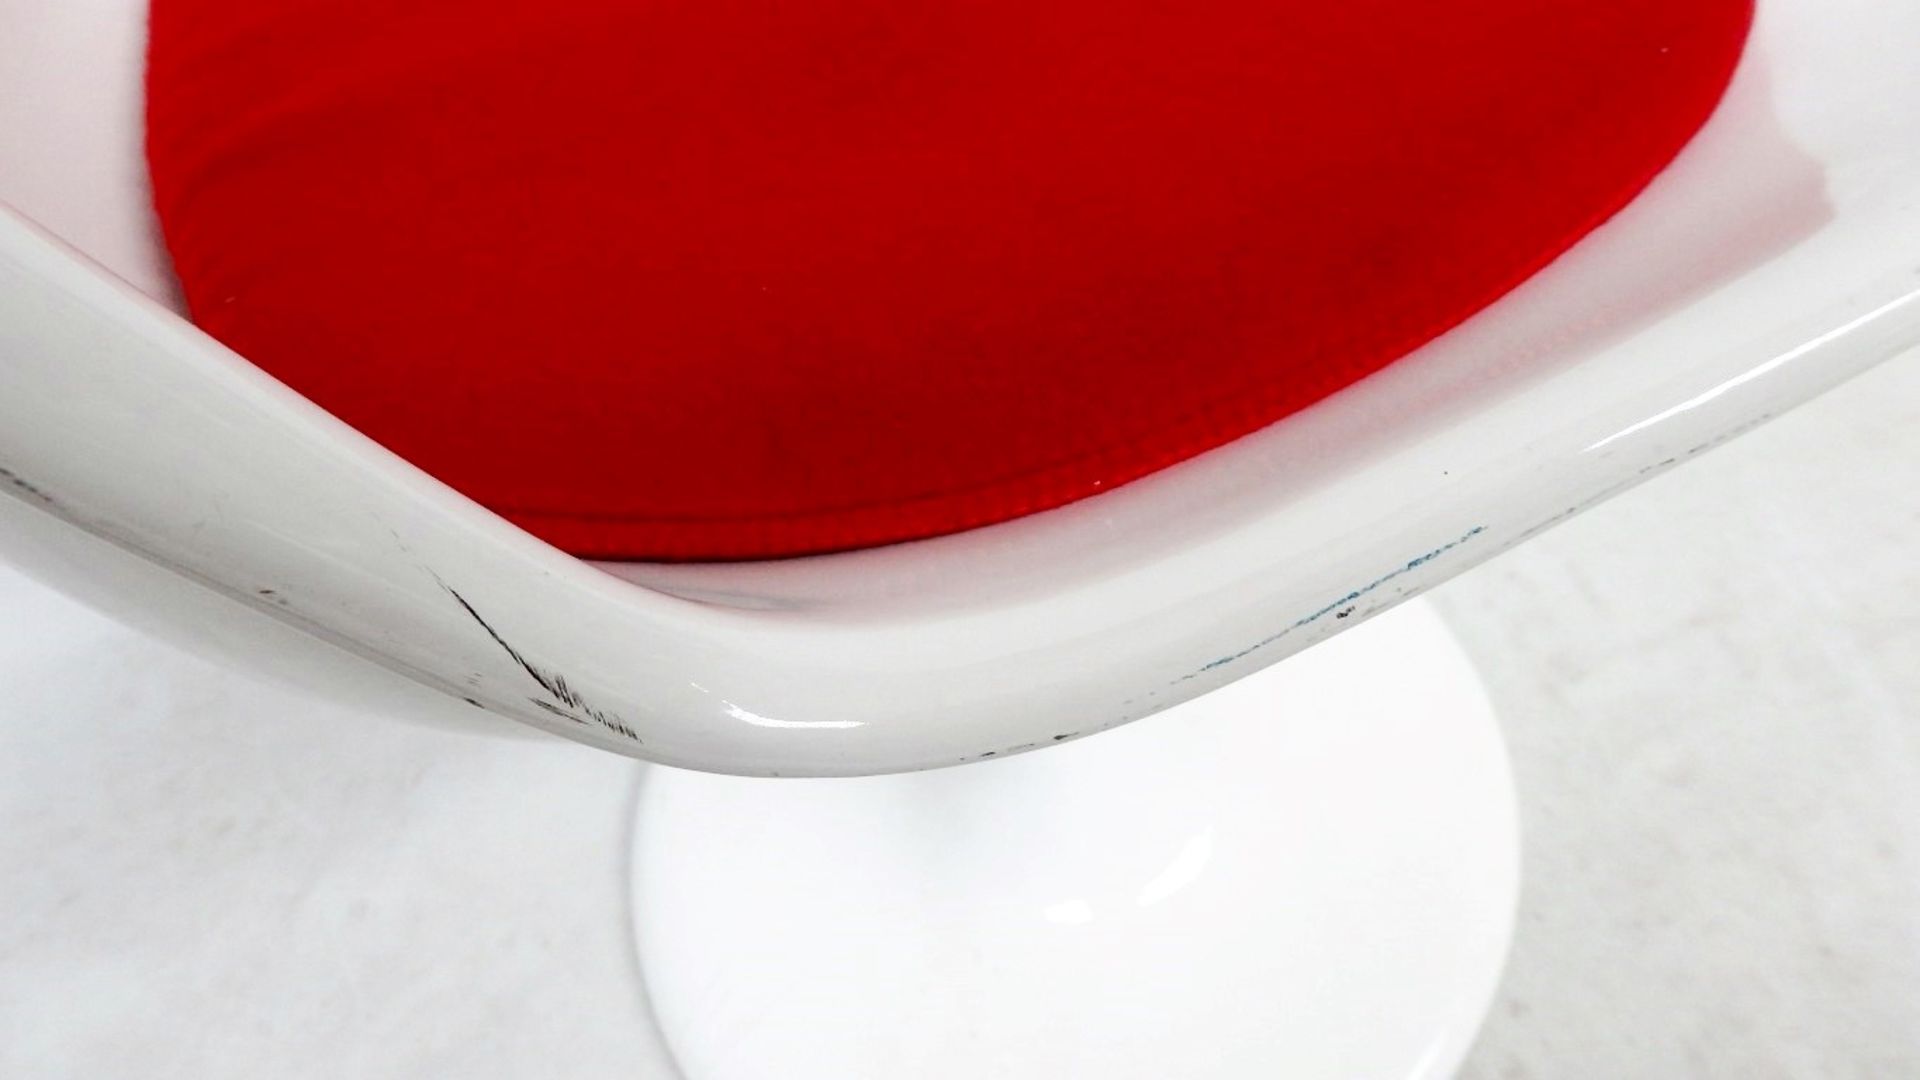 1 x Retro Style Swivel Chair With A White Hi-gloss Finish - Includes Cushion As Shown - - Image 2 of 7